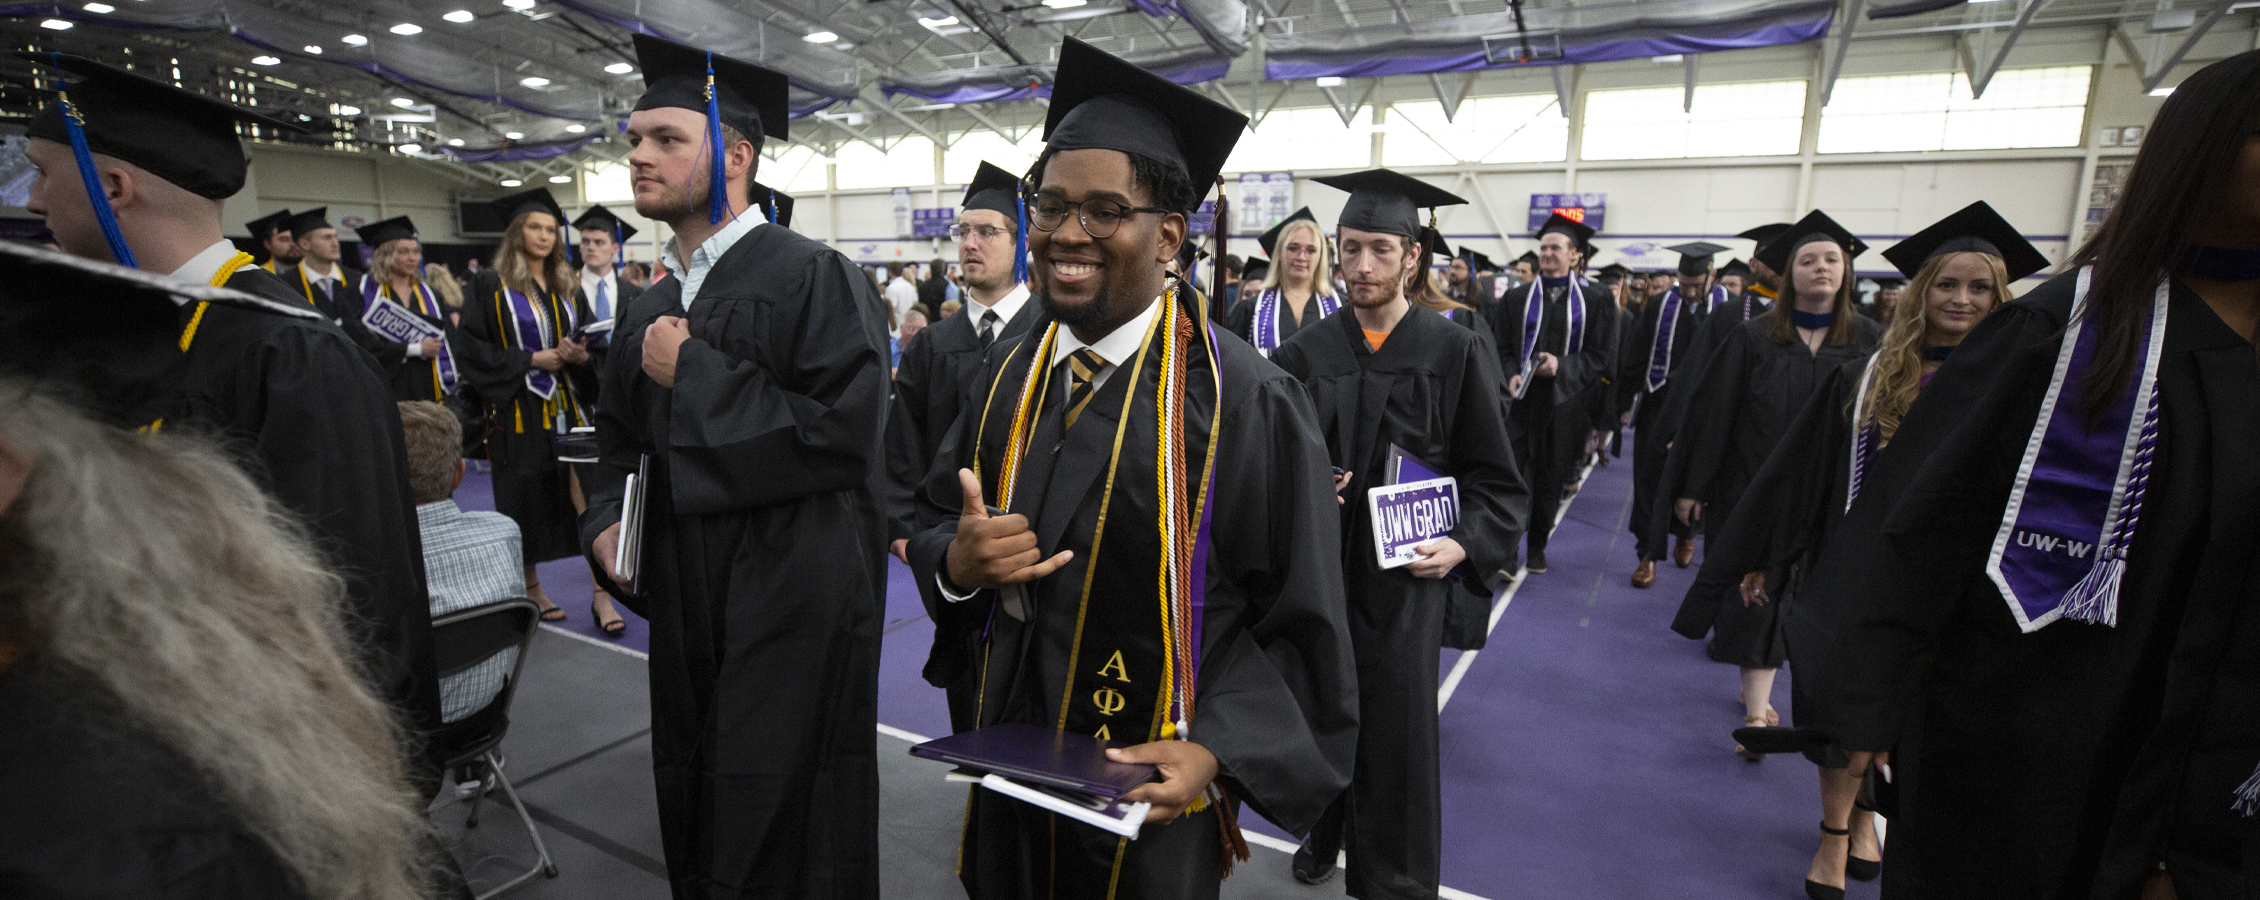 Graduates proceed down the aisles at Commencement in the fieldhouse.